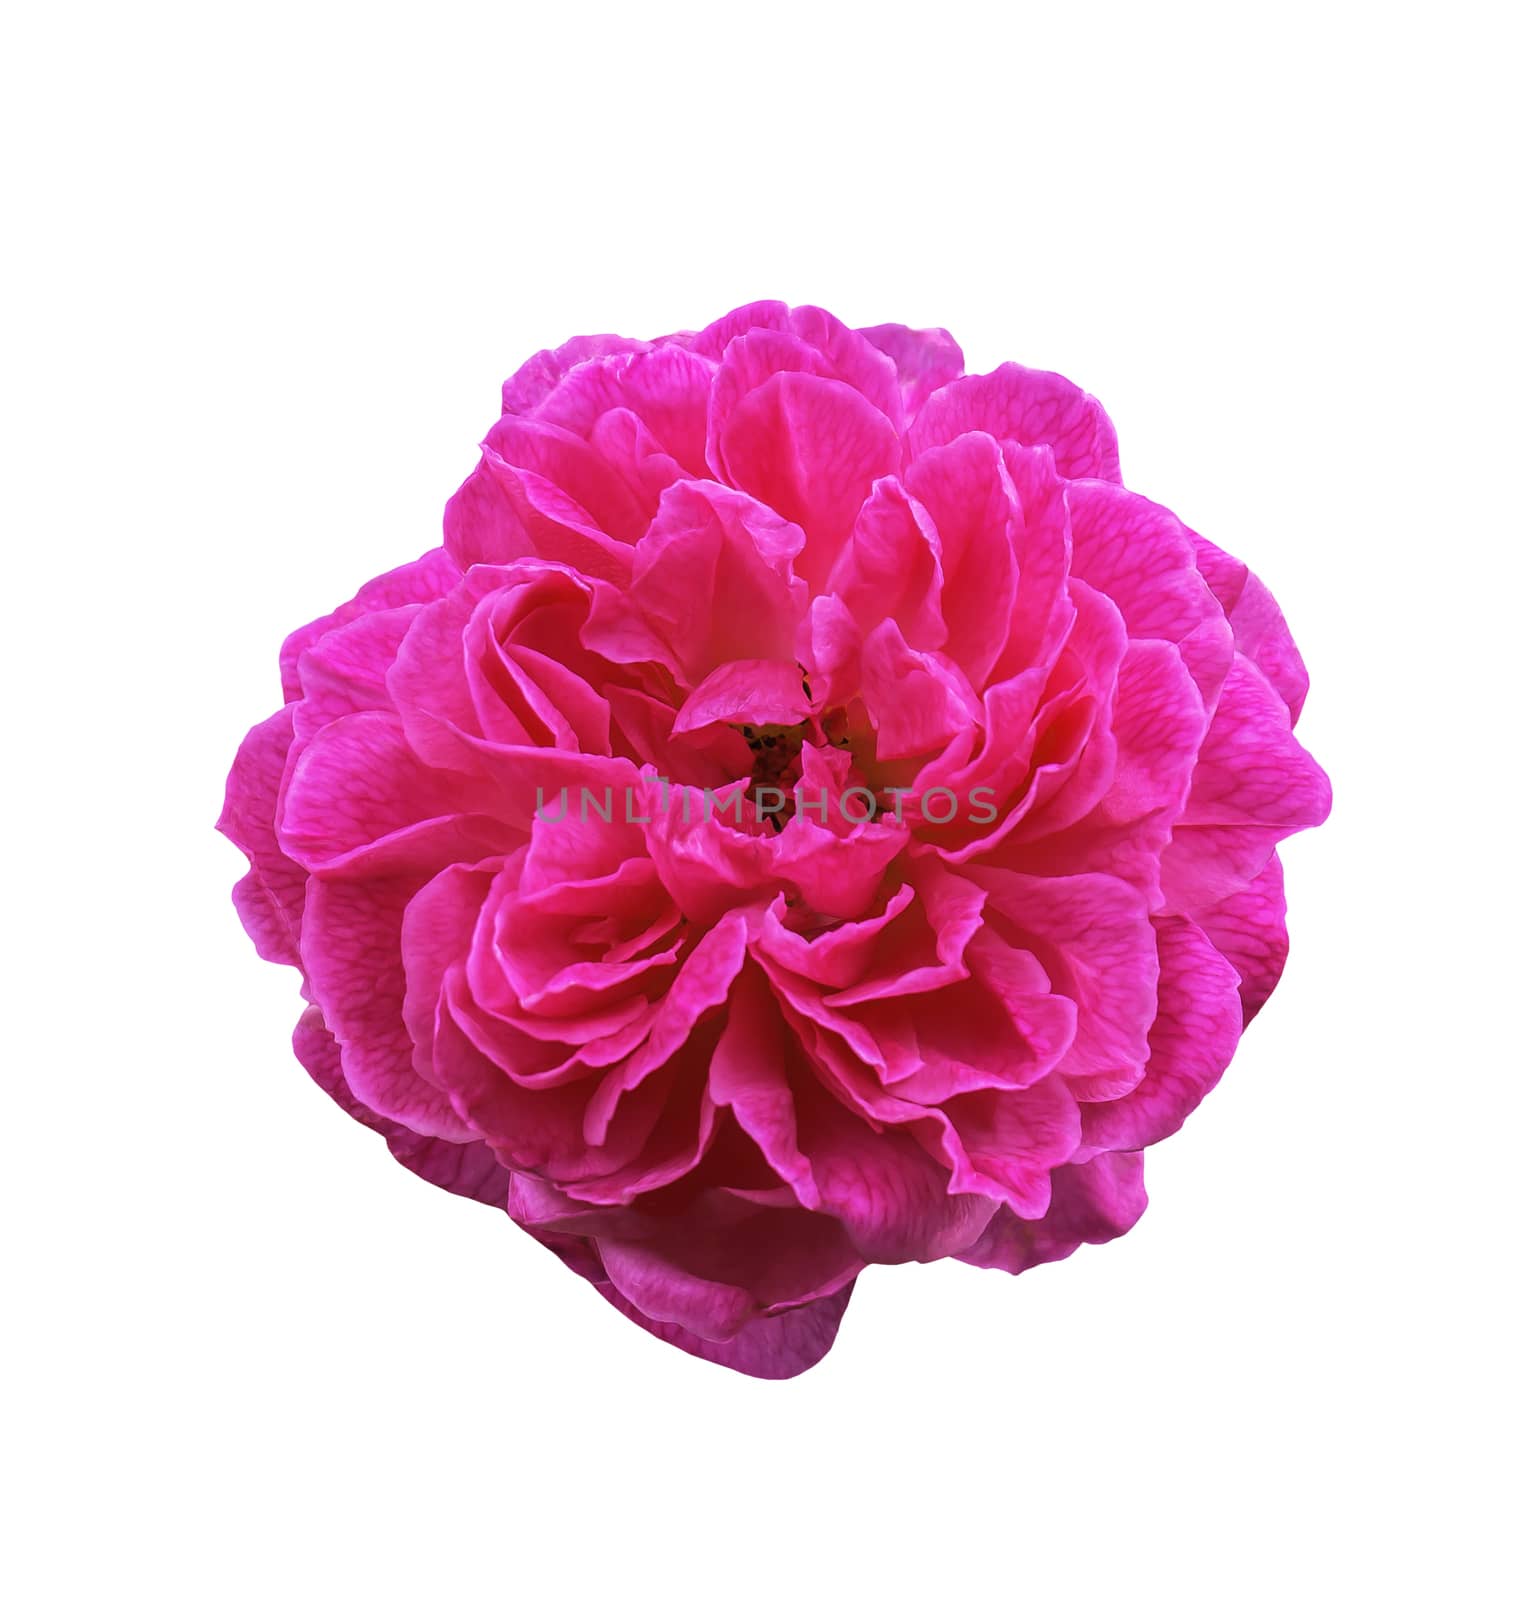 Pink rose flower isolated on white with clipping path